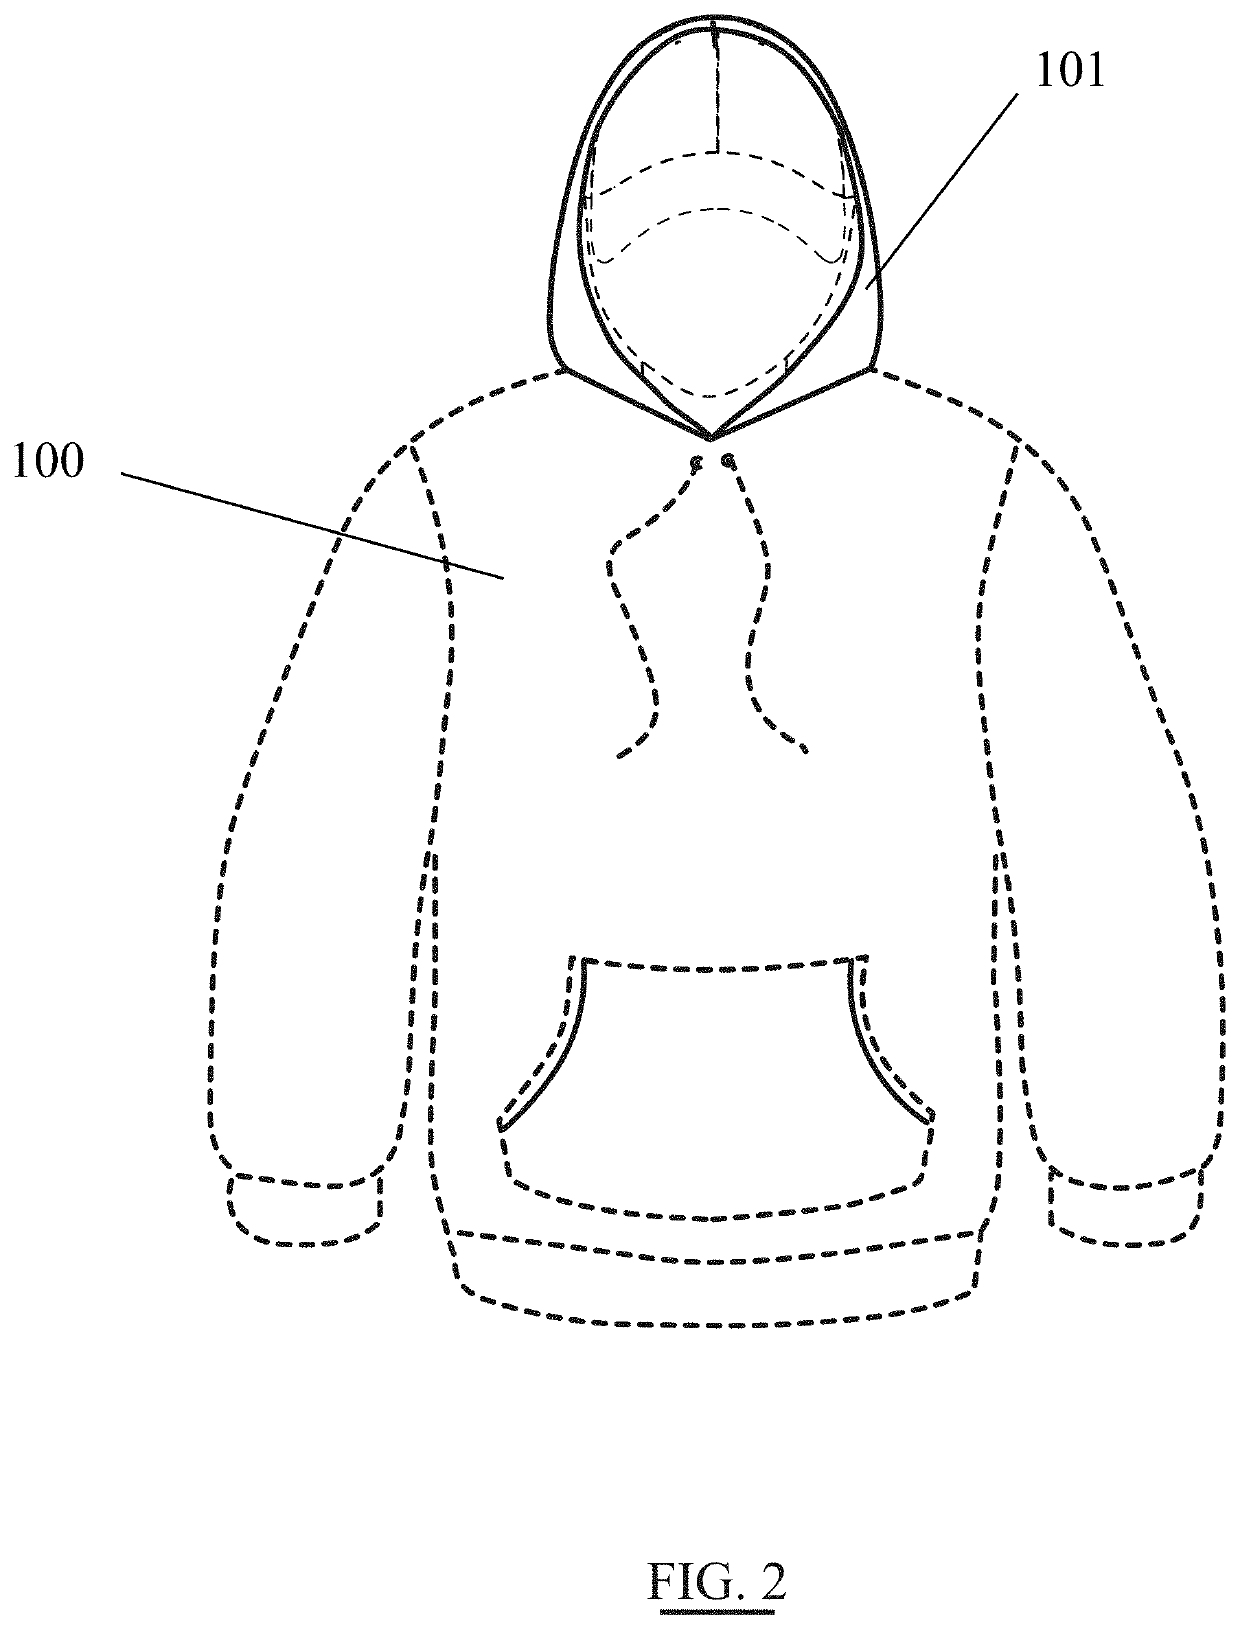 Garment with magnetic clasp and methods of using the same